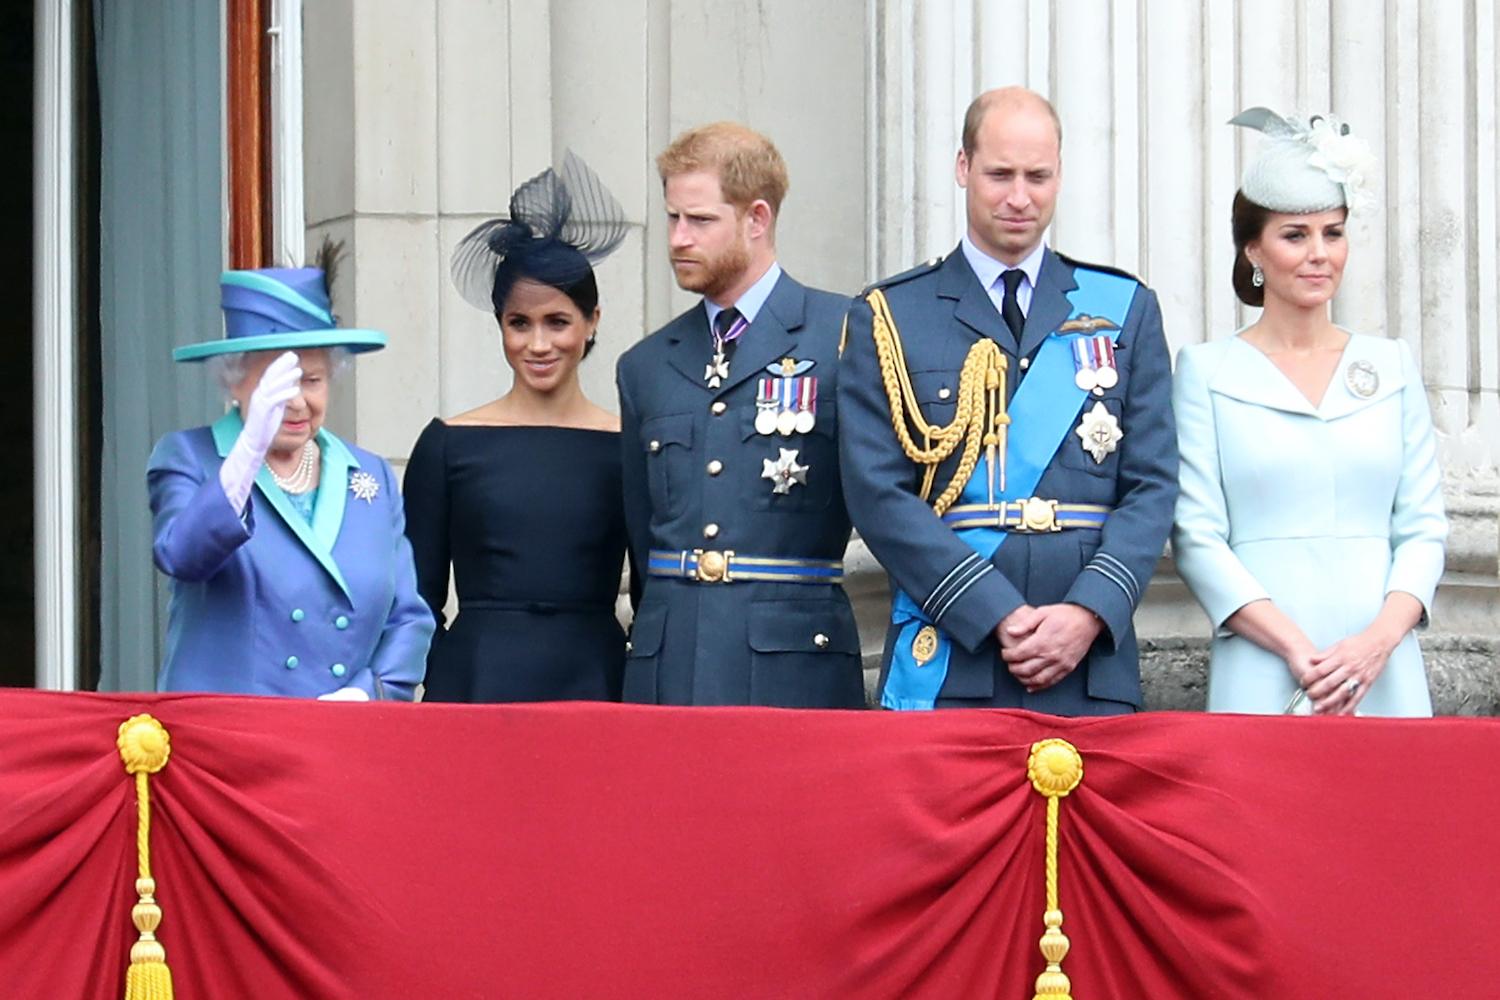 Queen Elizabeth II, Meghan Markle, Prince Harry, Prince William, and Kate Middleton watch the RAF flypast on the balcony of Buckingham Palace